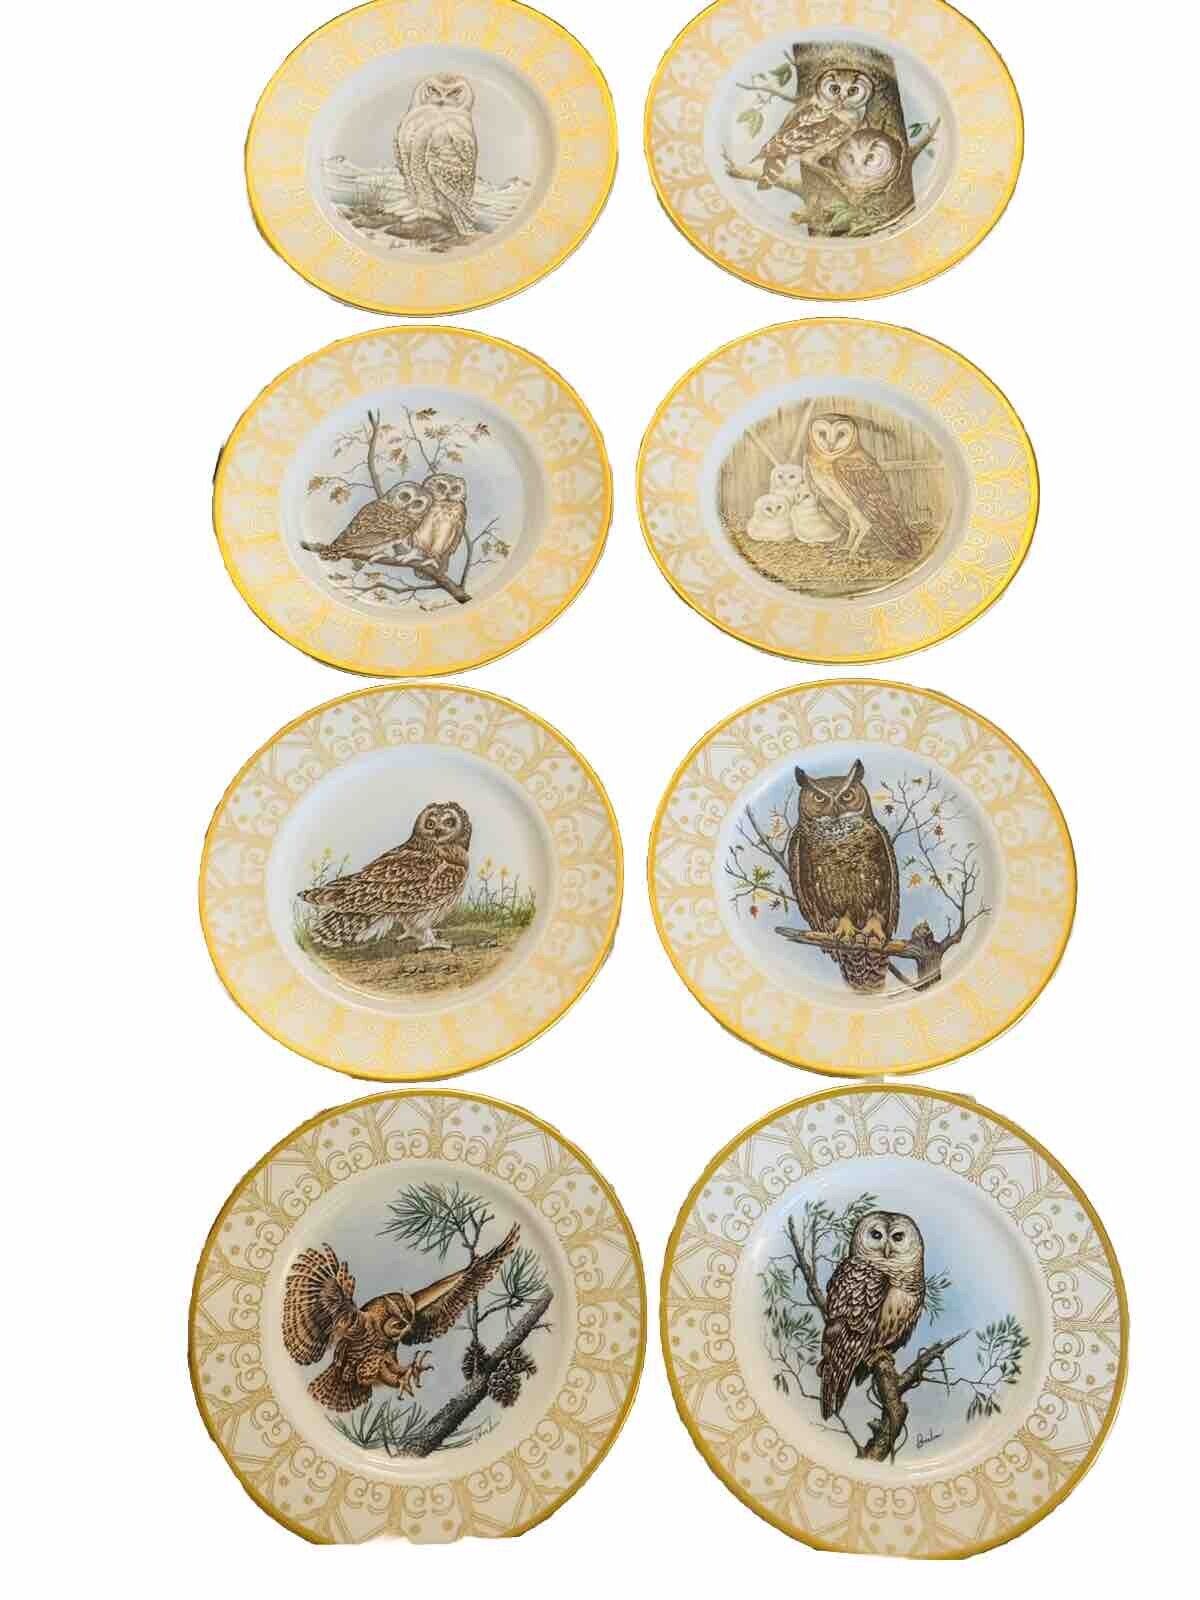 Complete Set Of 8 Edward Marshall Boehm Bone China Owl Plates Collection MINT